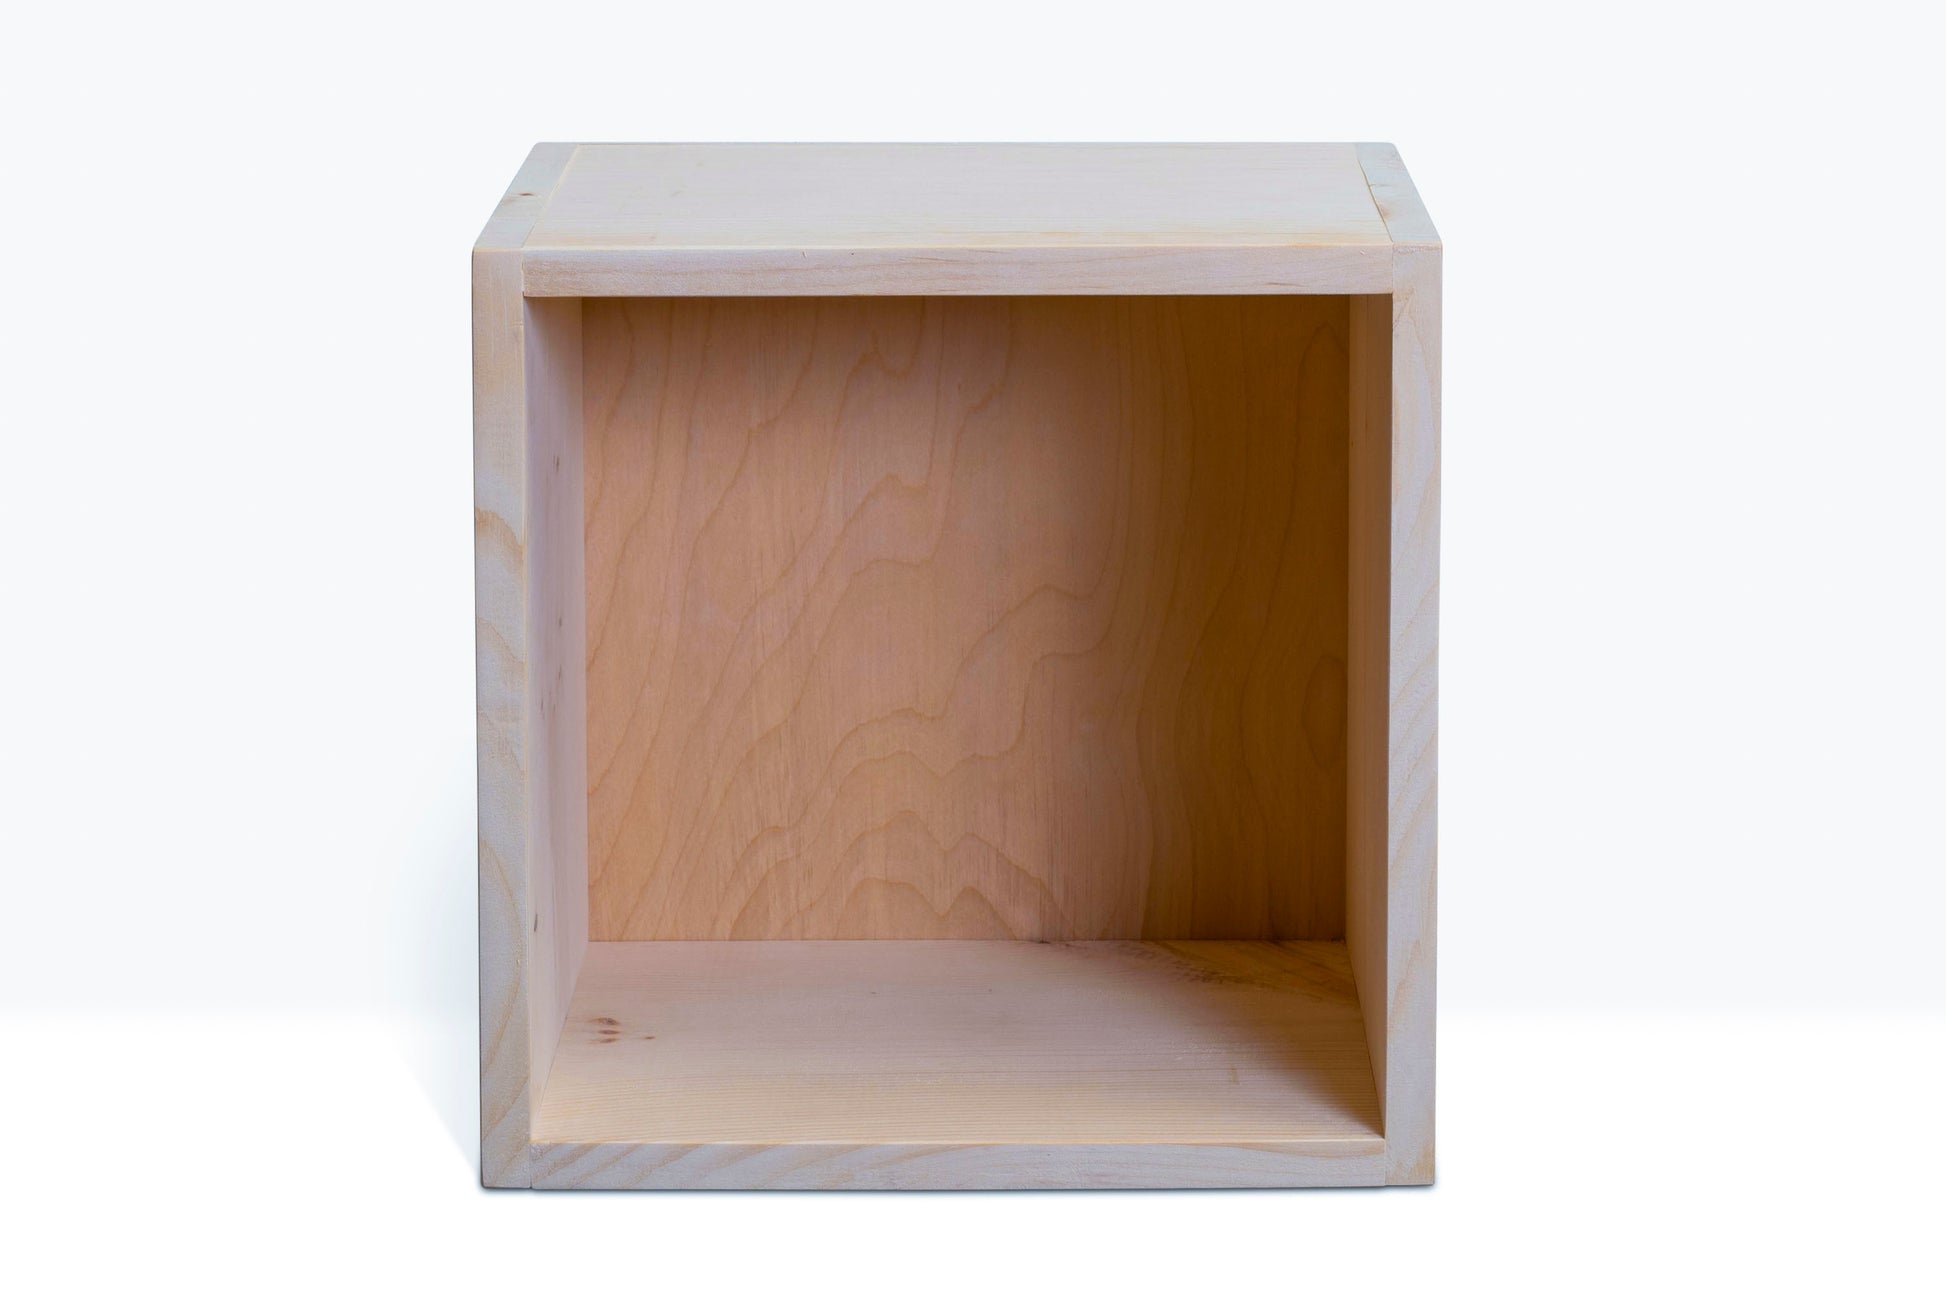 Evergreen Single Cube, shown in unfinished pine.